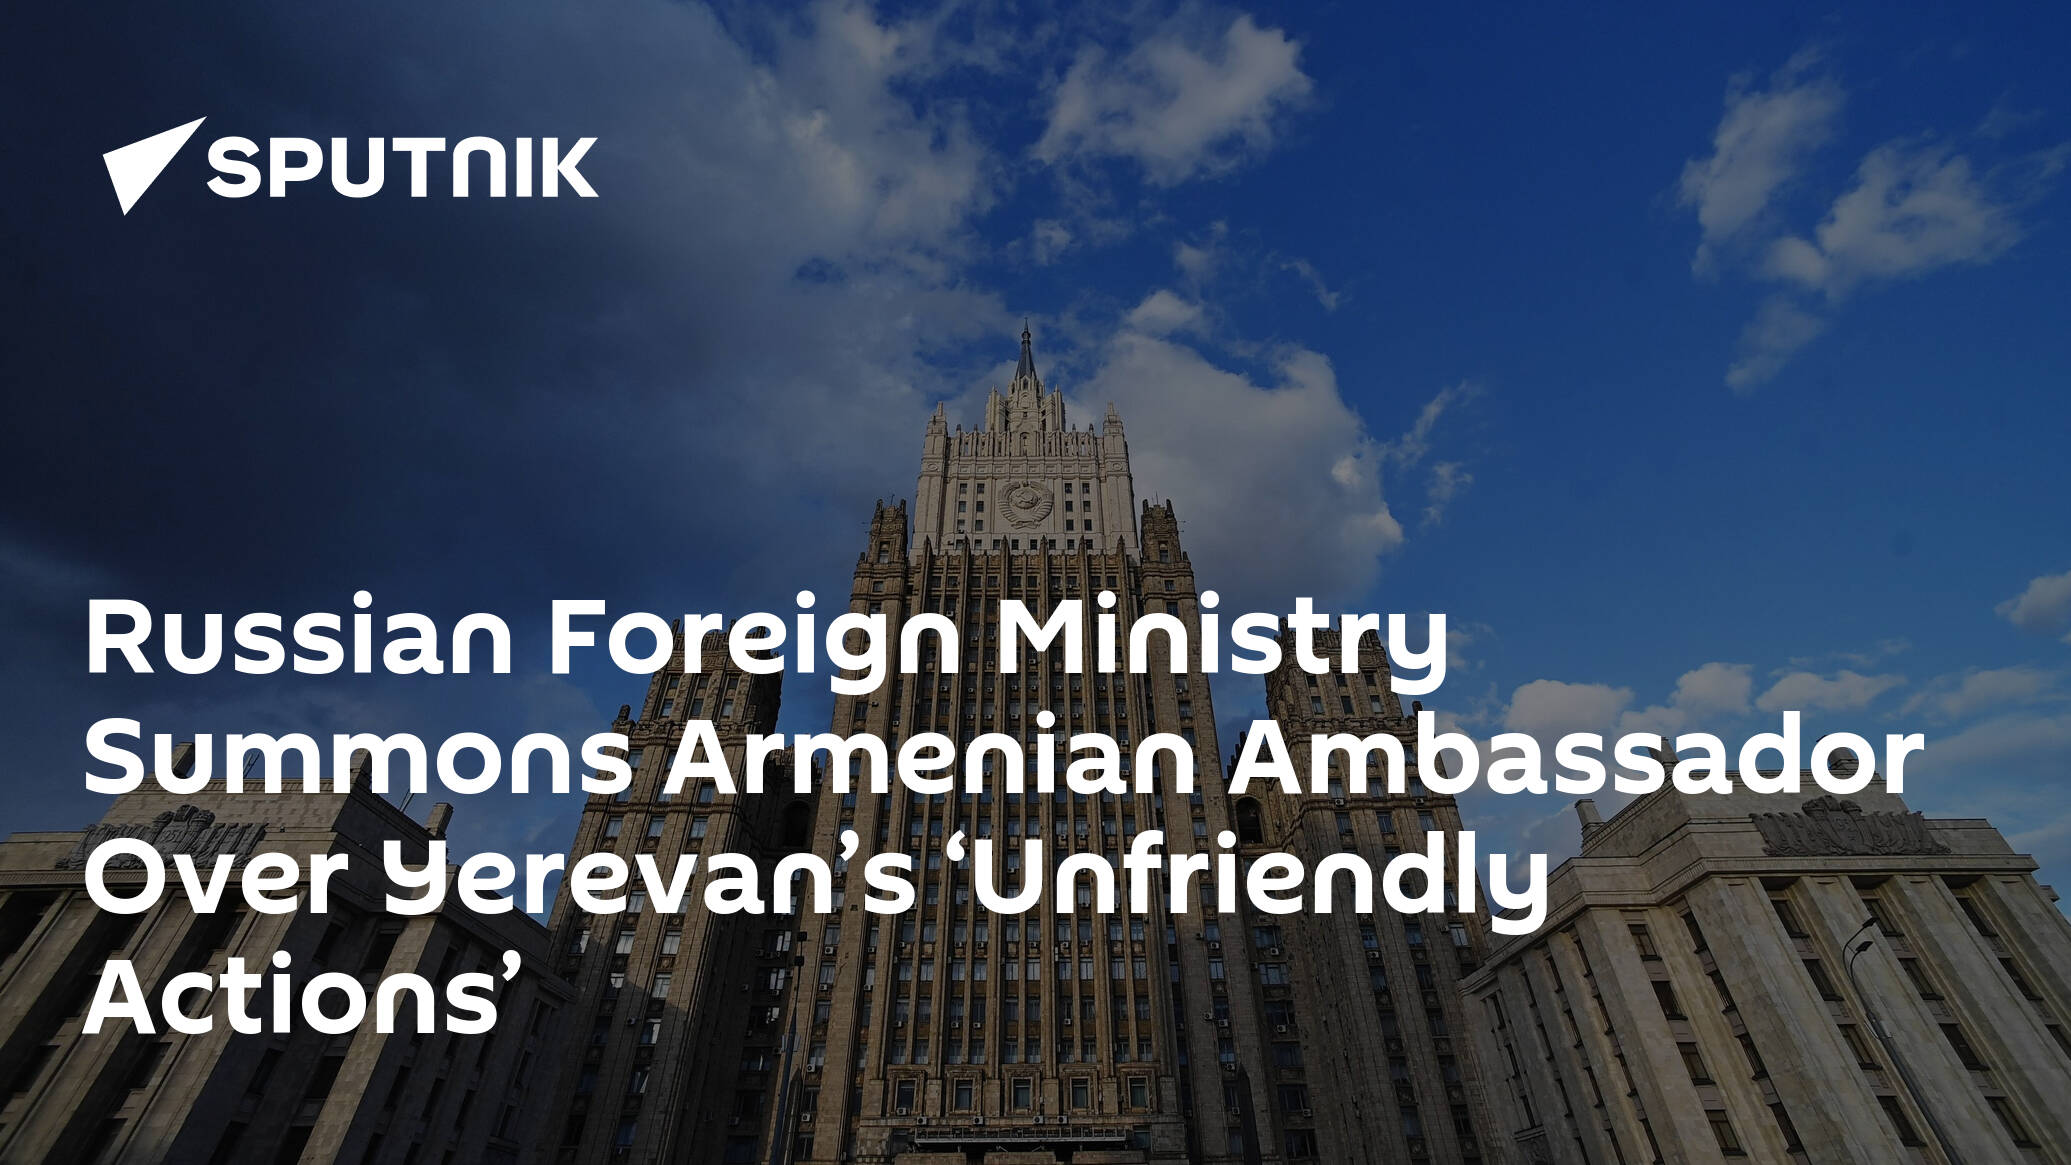 Russian Foreign Ministry Summons Armenian Ambassador Over Yerevan’s ‘Unfriendly Actions’